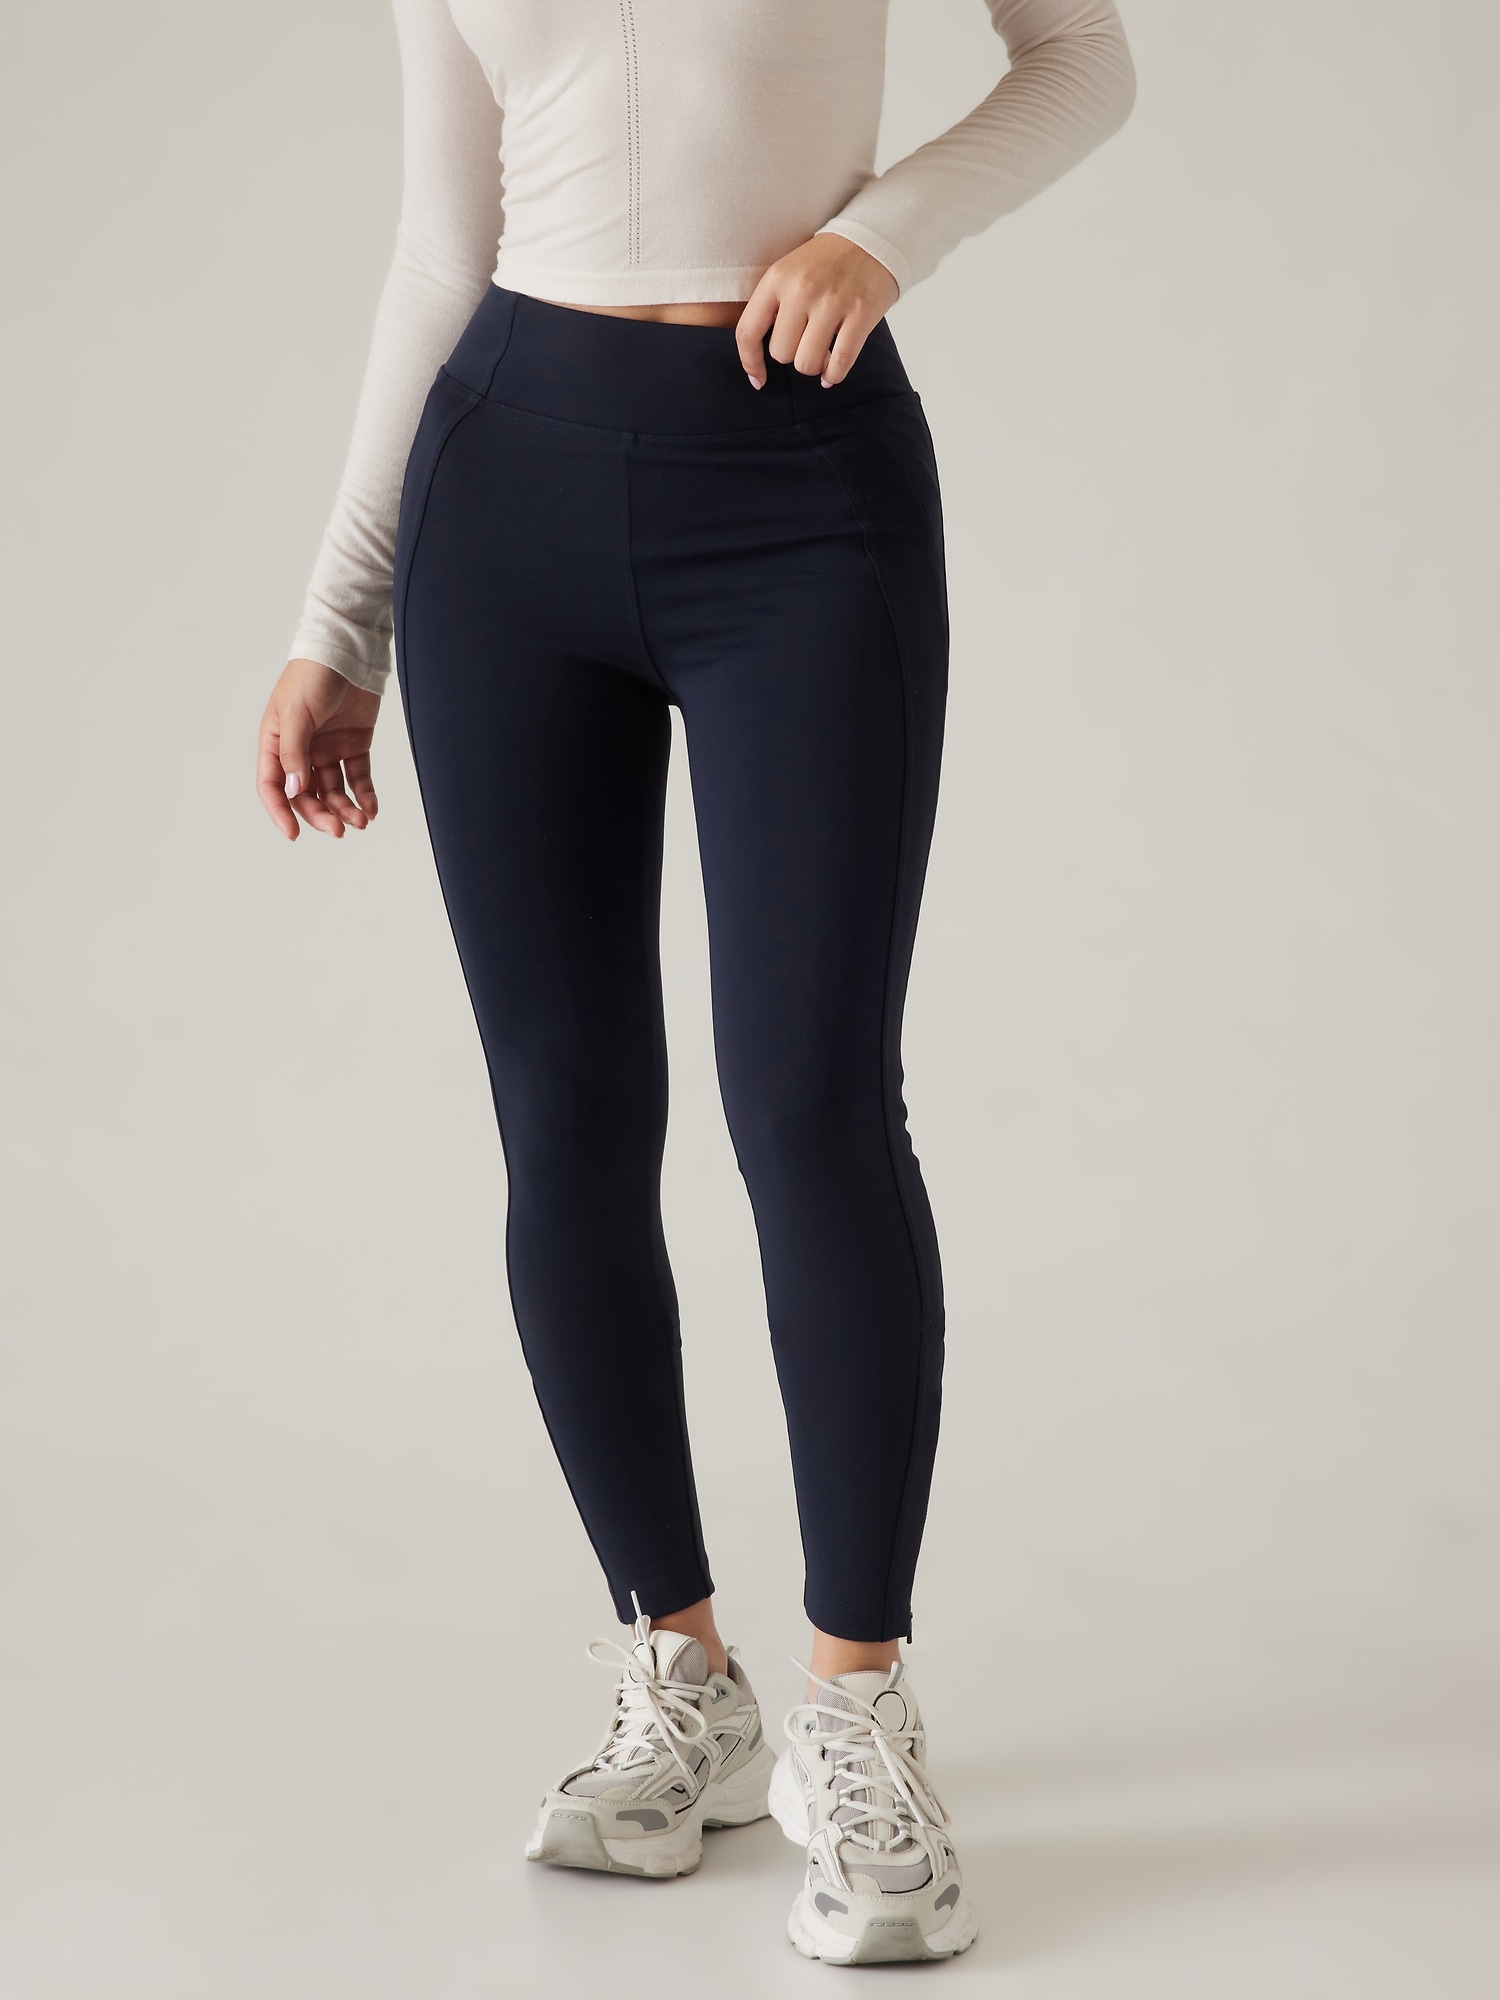 lululemon - Get it right, get it tight. New colours of the Tight